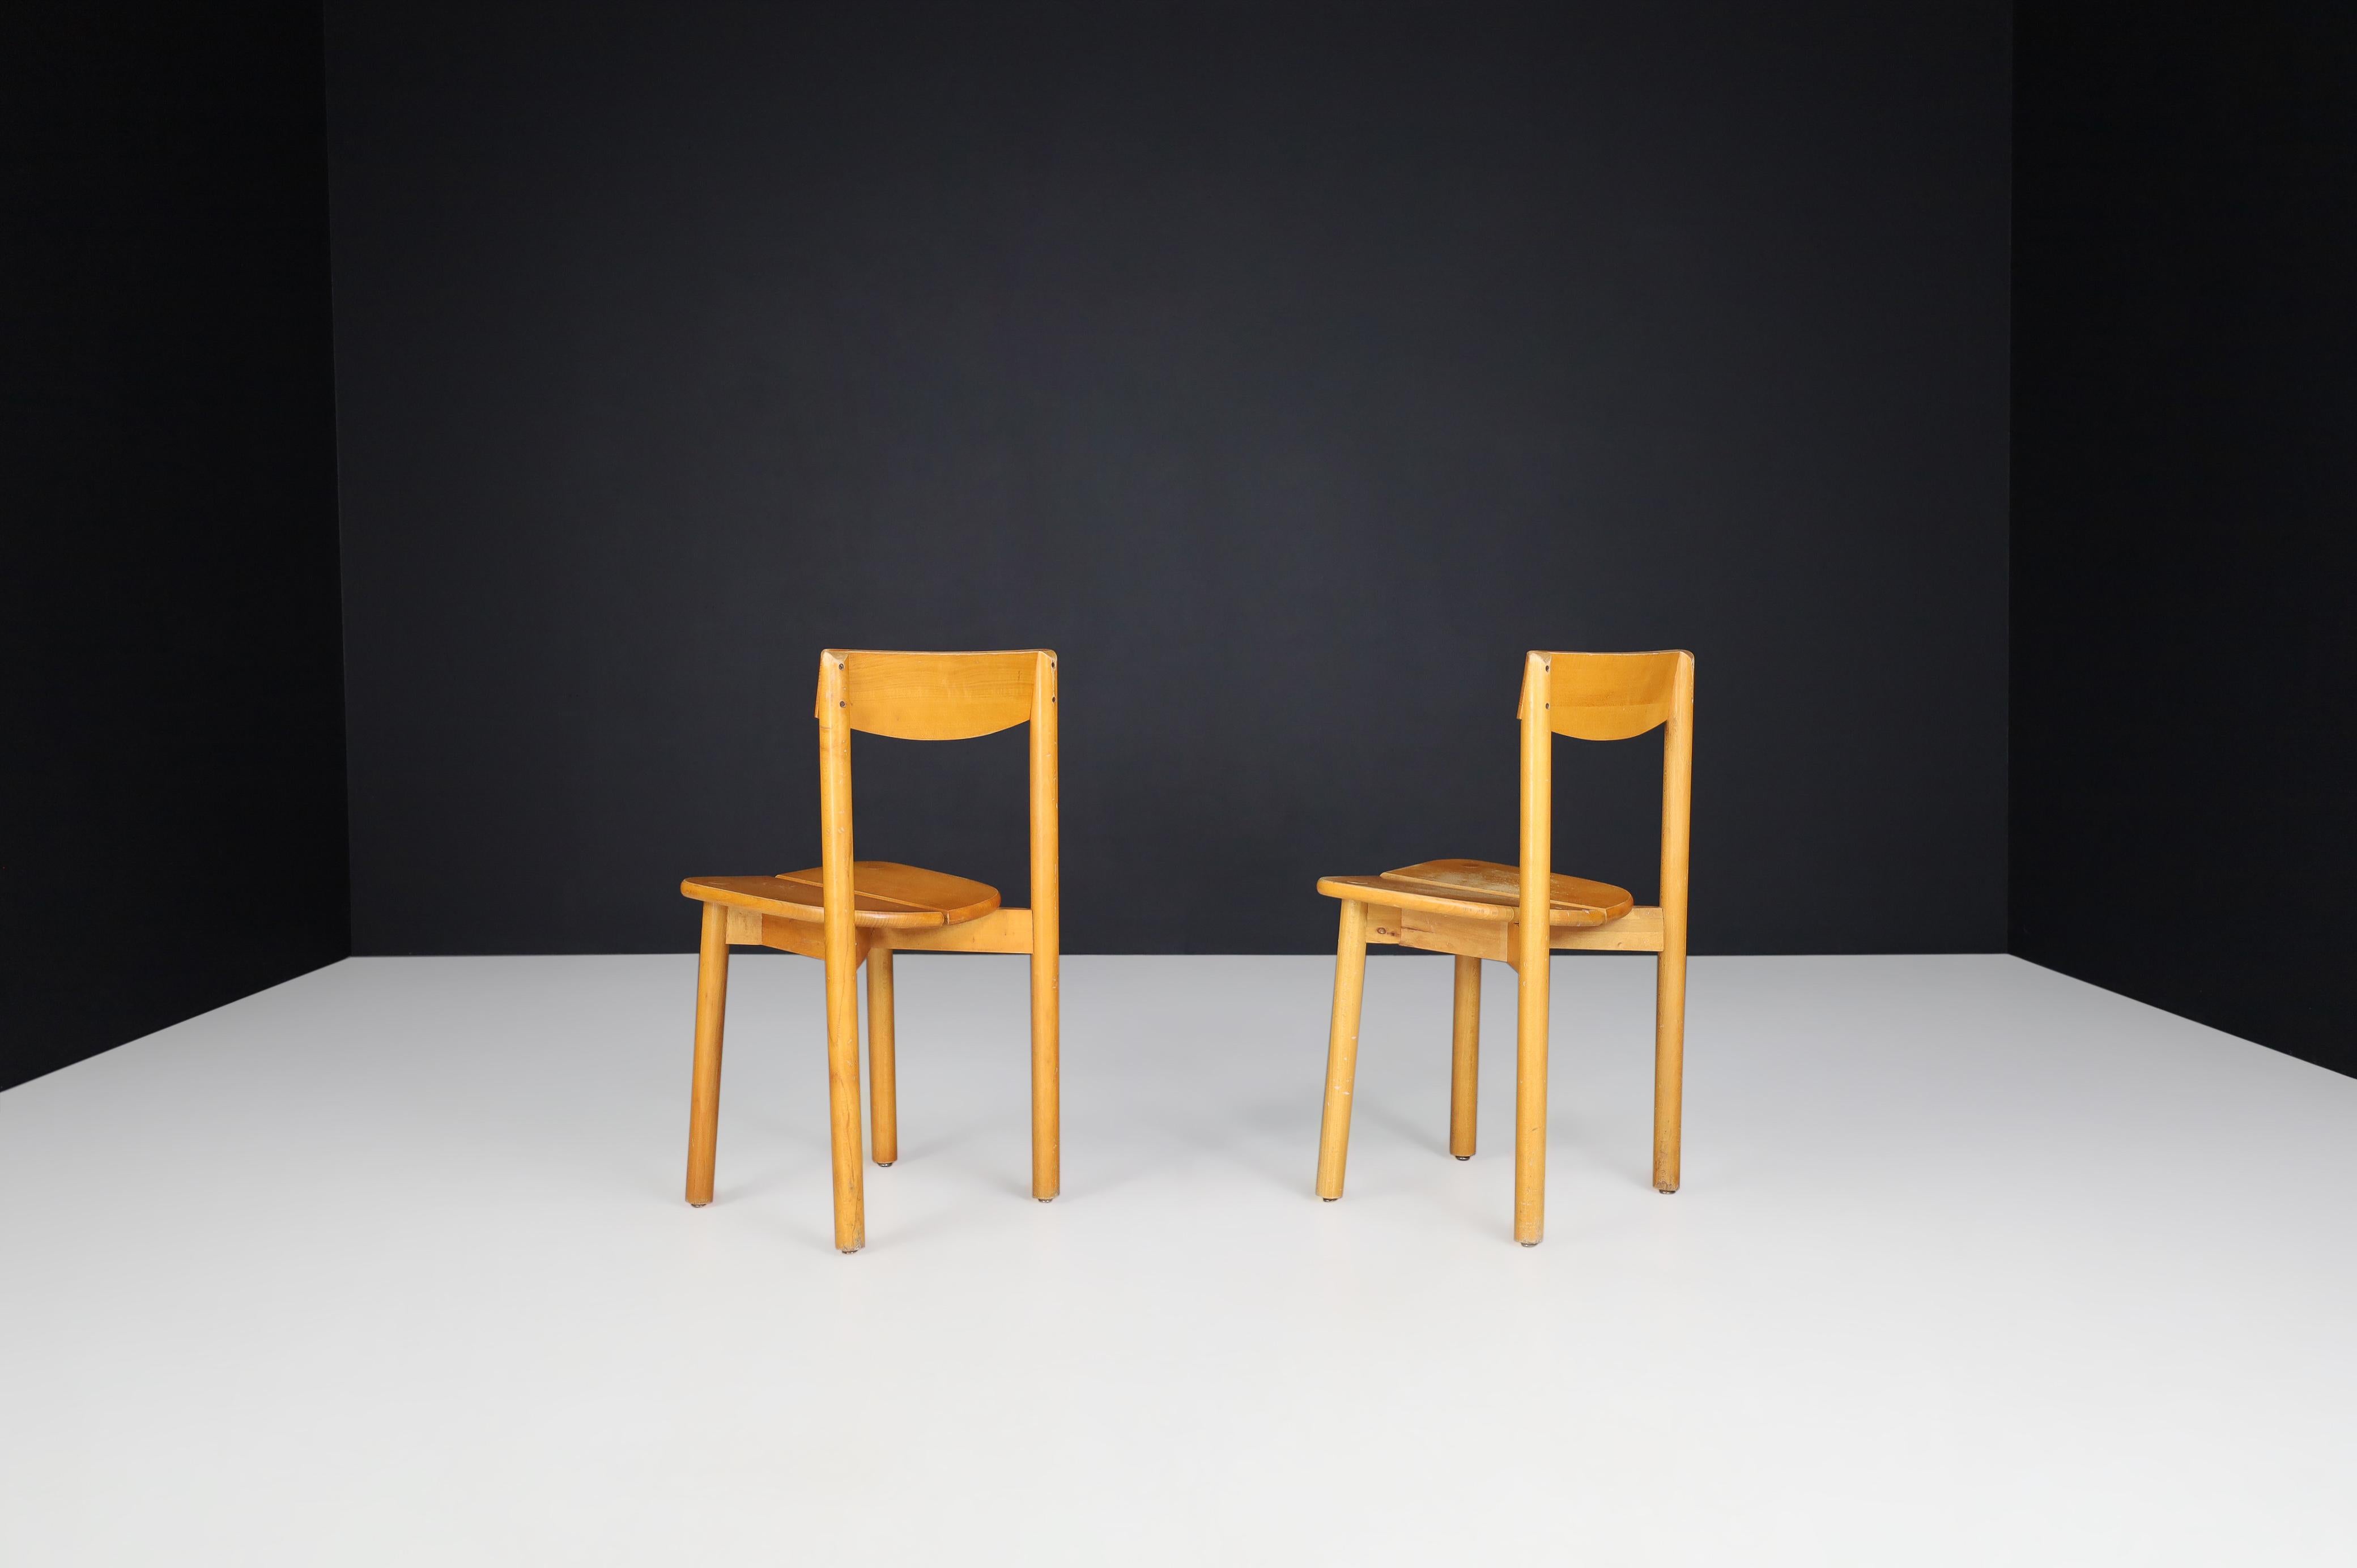 20th Century Pierre Gautier Solid Chairs in Blond Beech, France, 1960s For Sale